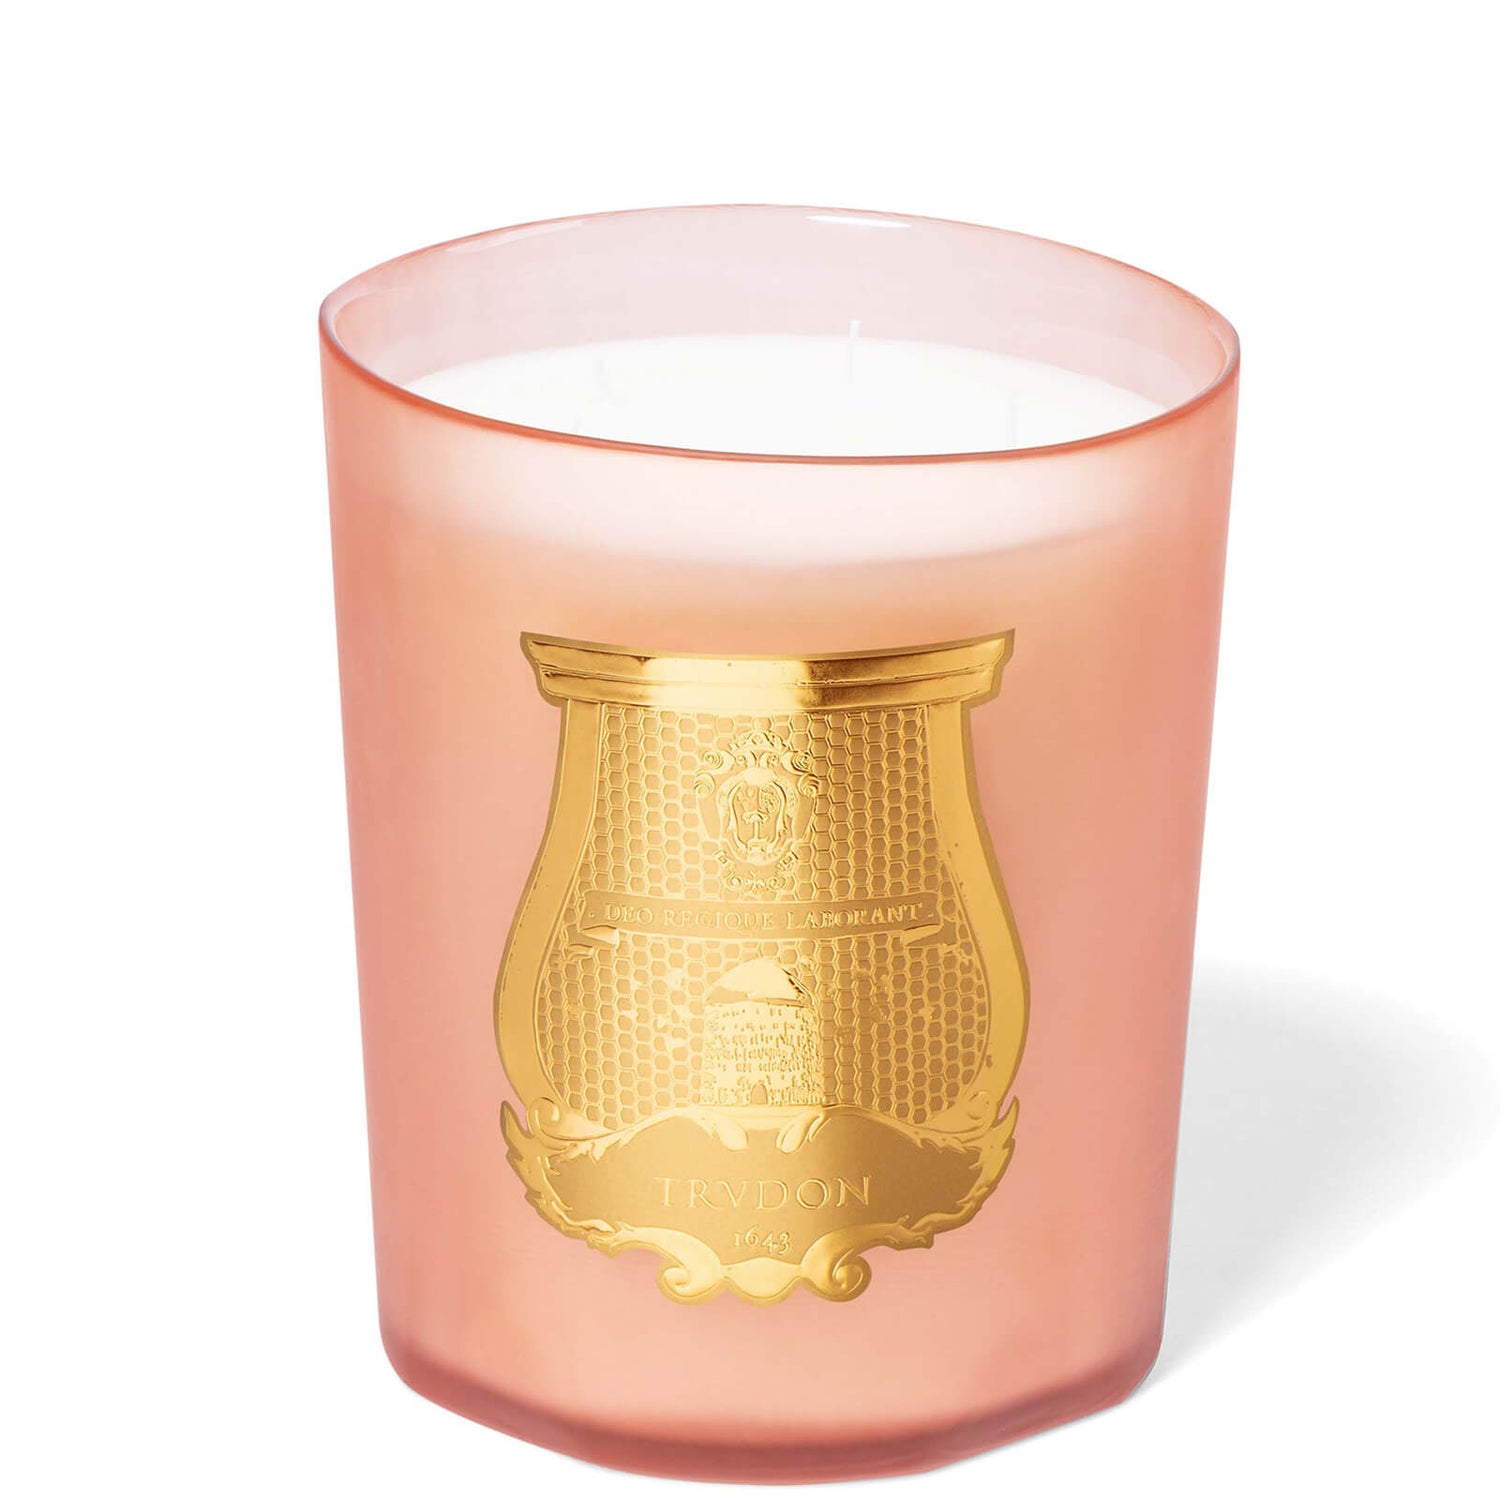 TRUDON Scented Candle 800g - Tuileries | Cult Beauty